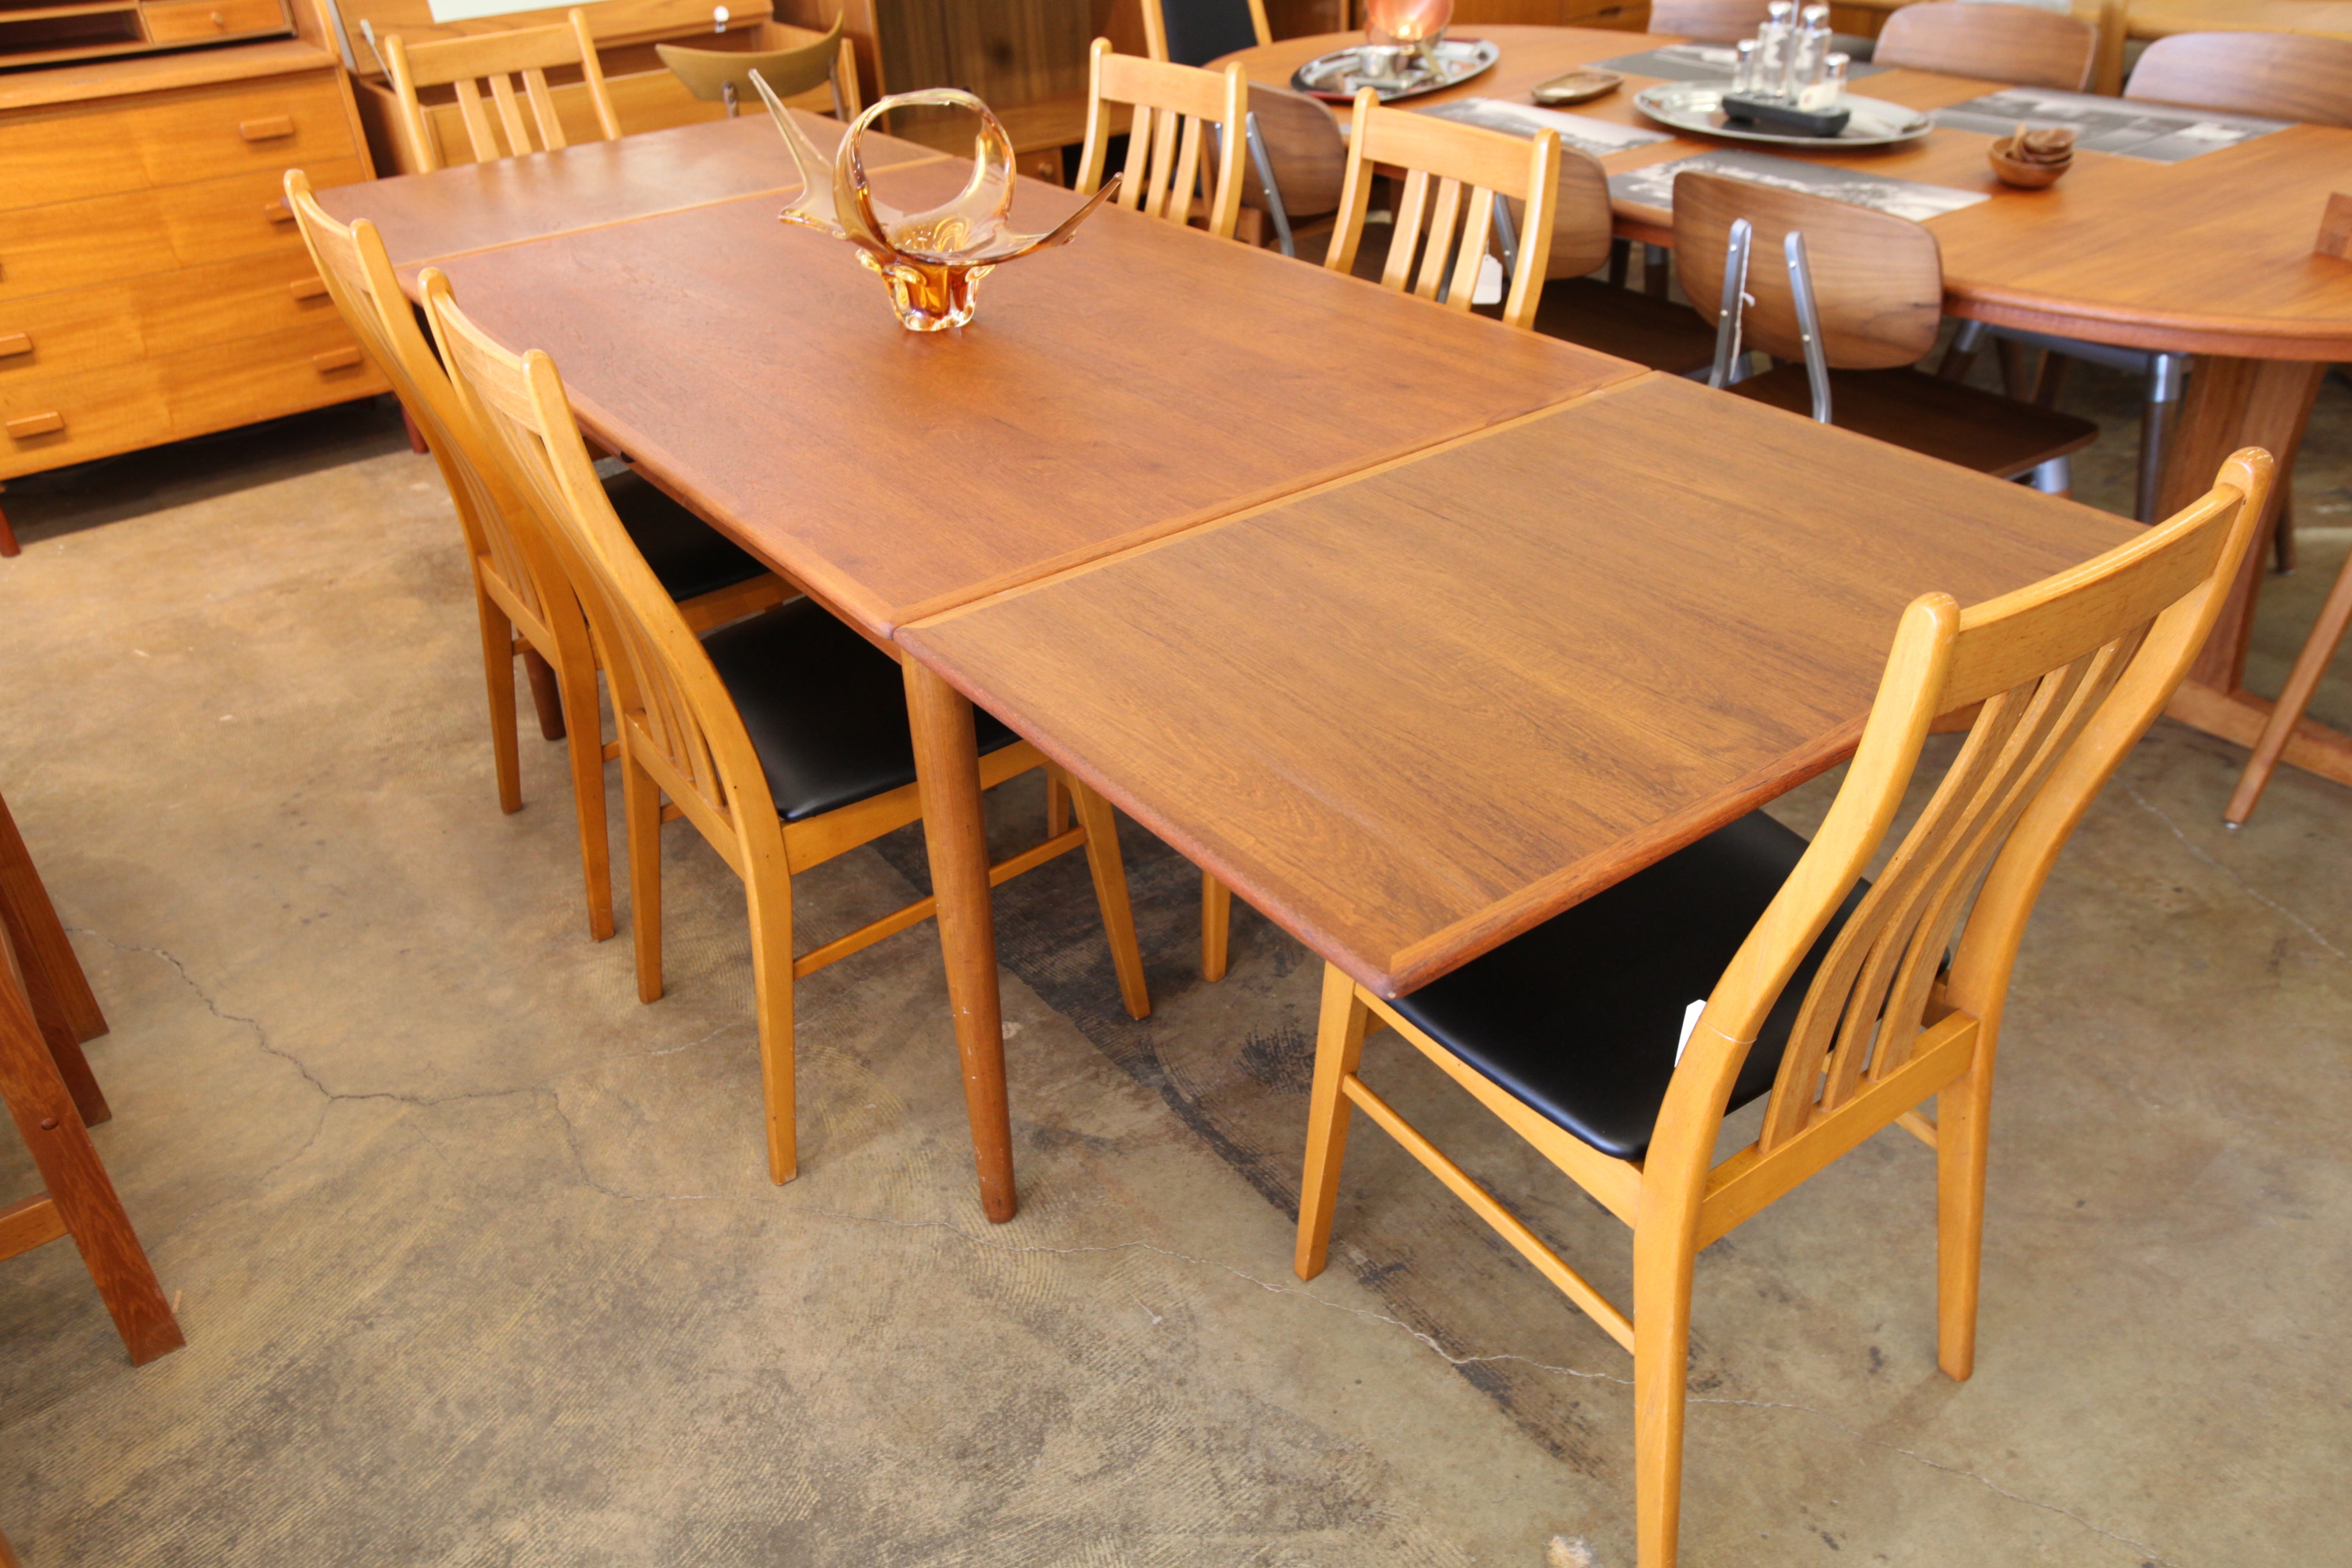 Vintage Long Danish Teak Dining Table w/ Pullout Extensions (104"x36")(57"x36") 28.75"H